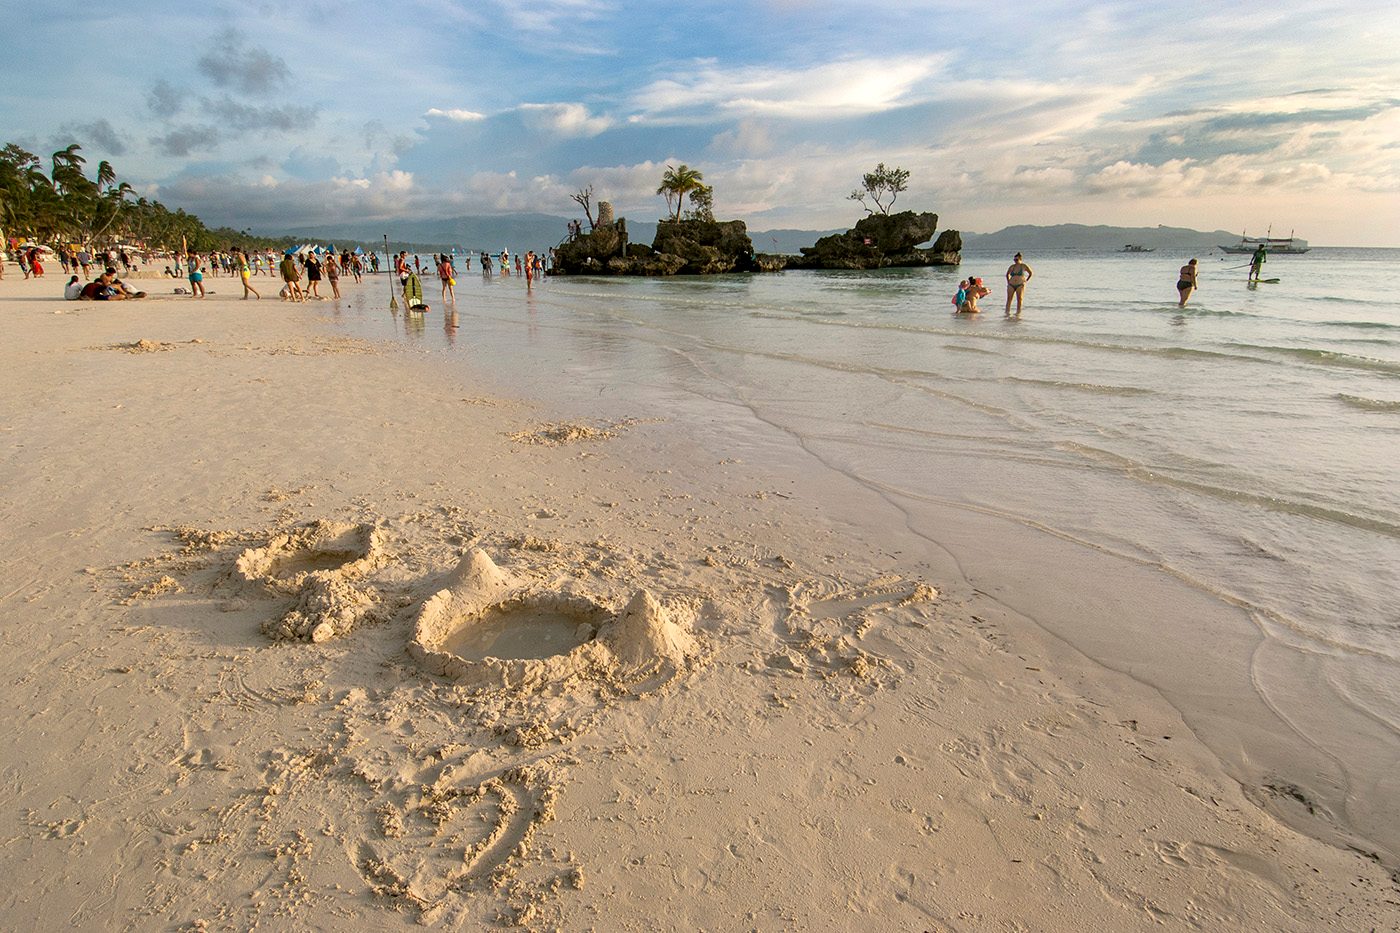 11 South Korean tourists in Boracay being monitored for coronavirus